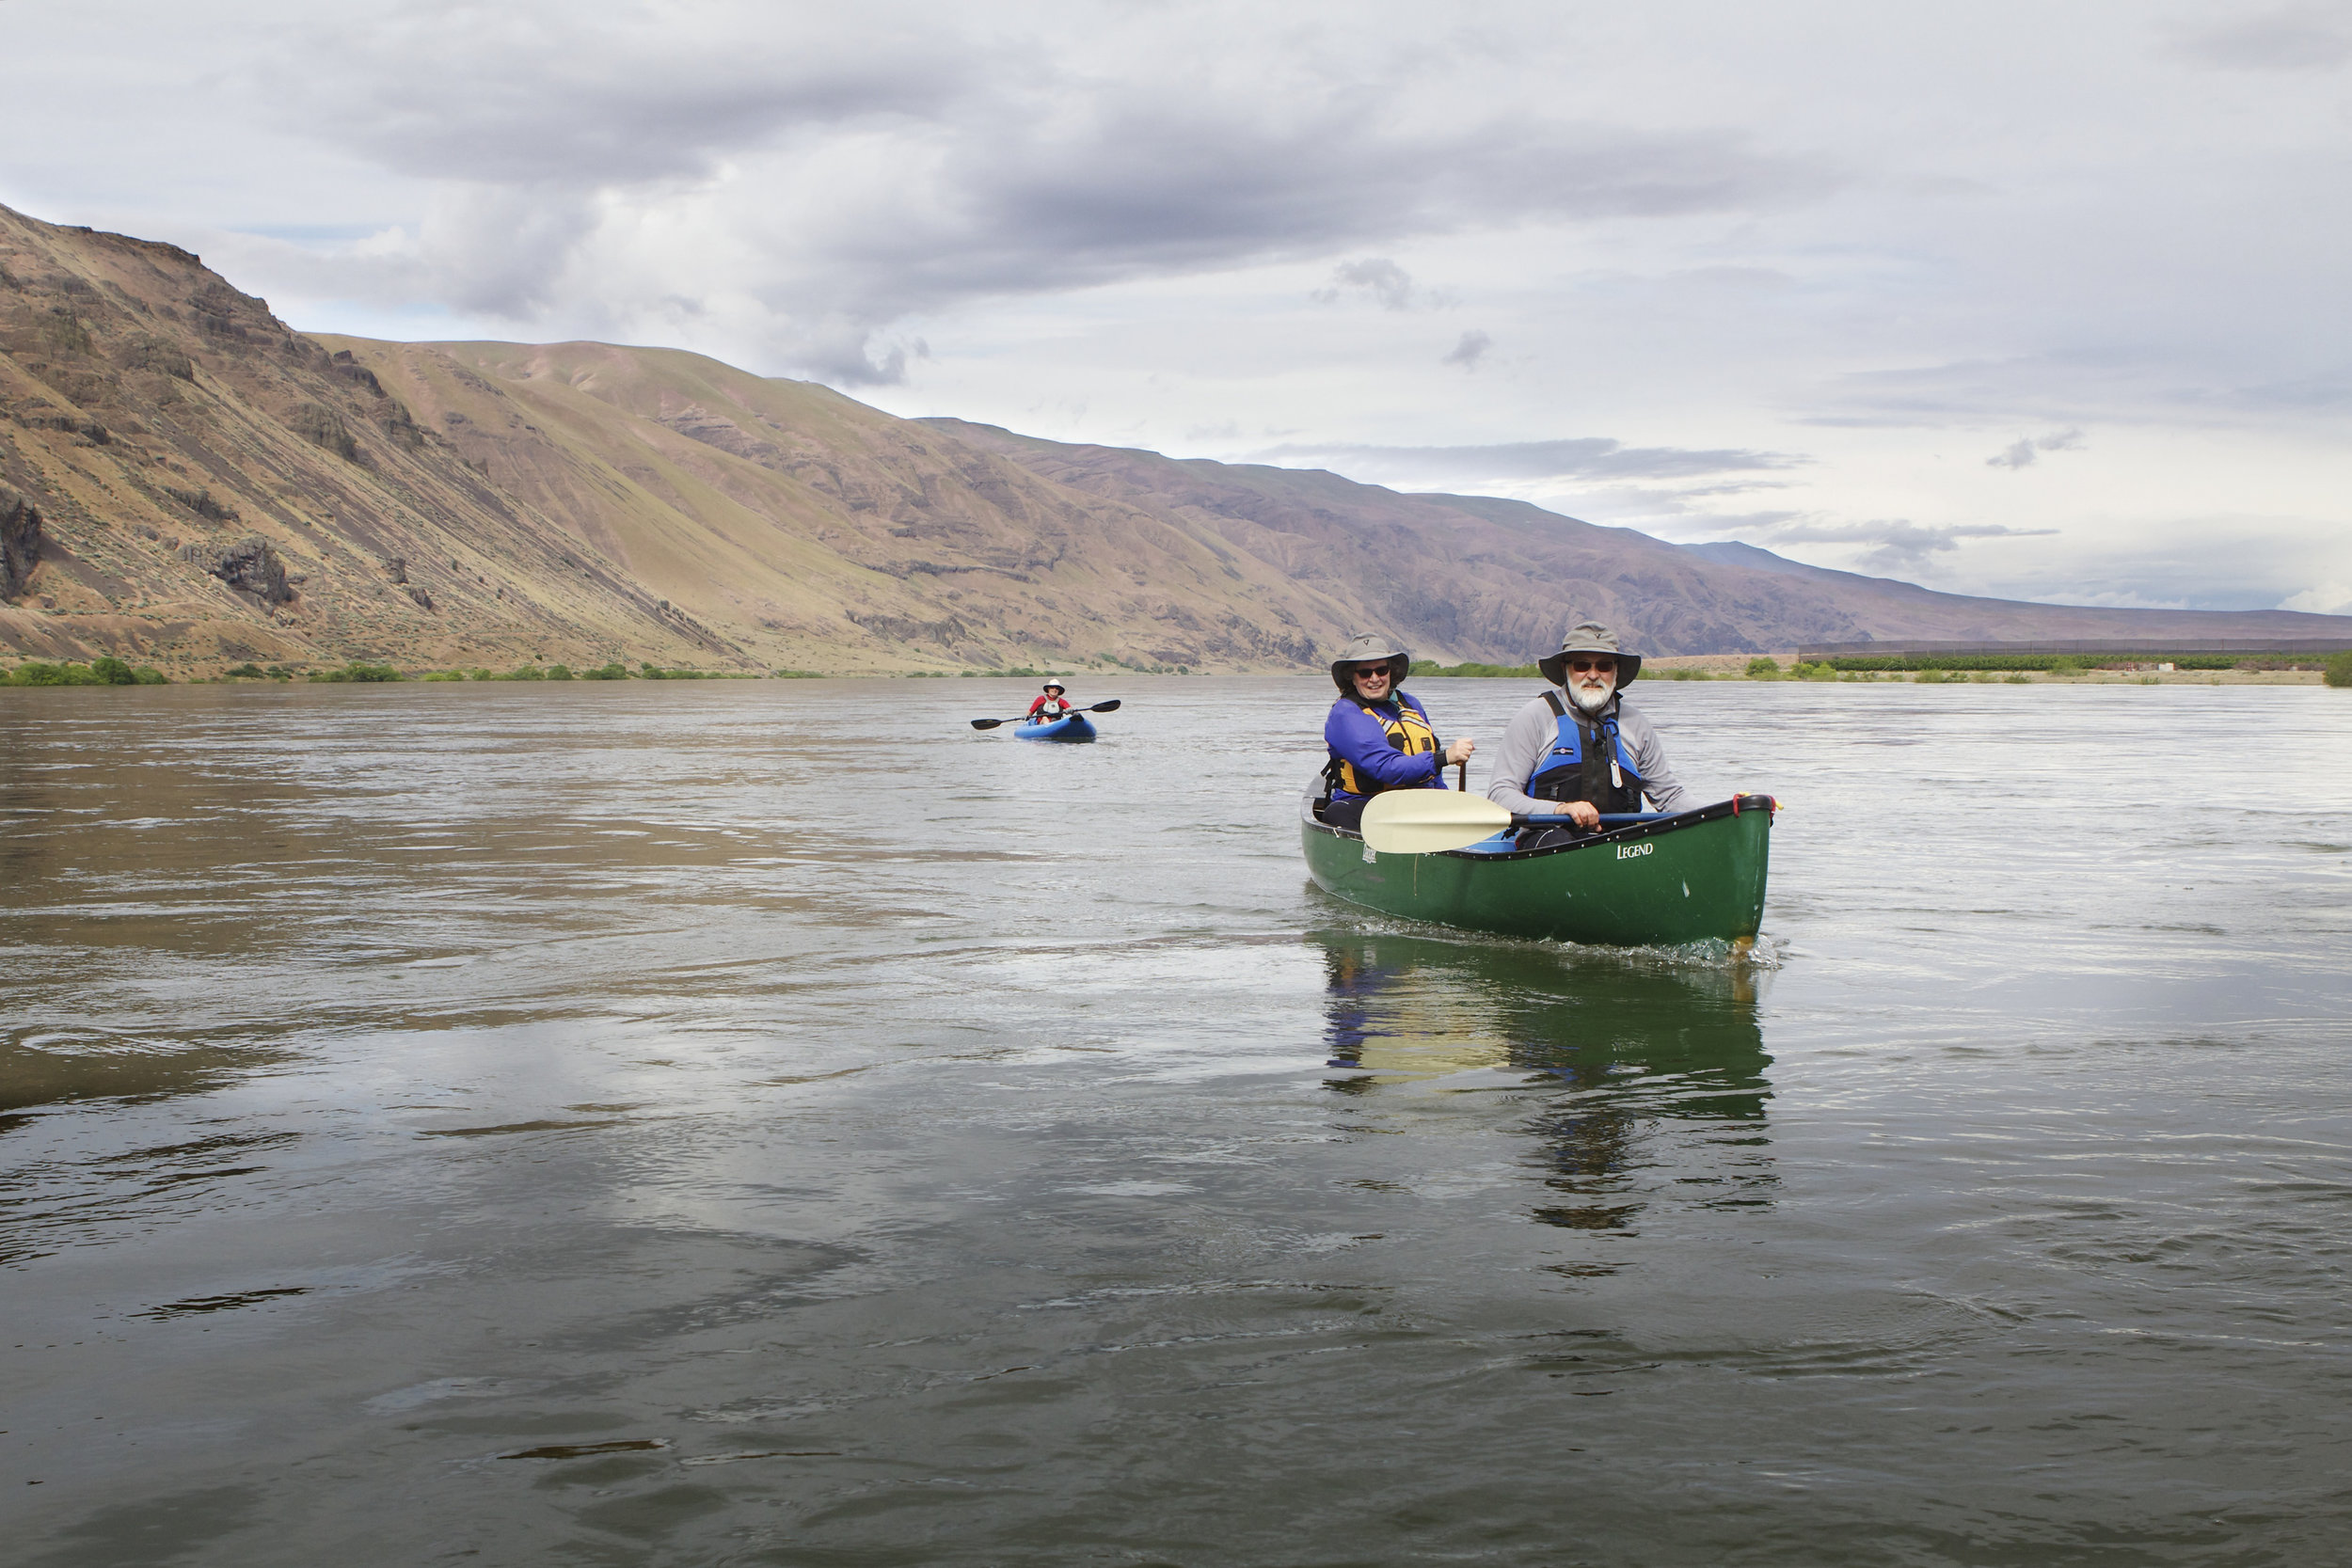  Canoeing on the Columbia River in the Hanford Reach National Monument. Photo by Michael Deckert. 